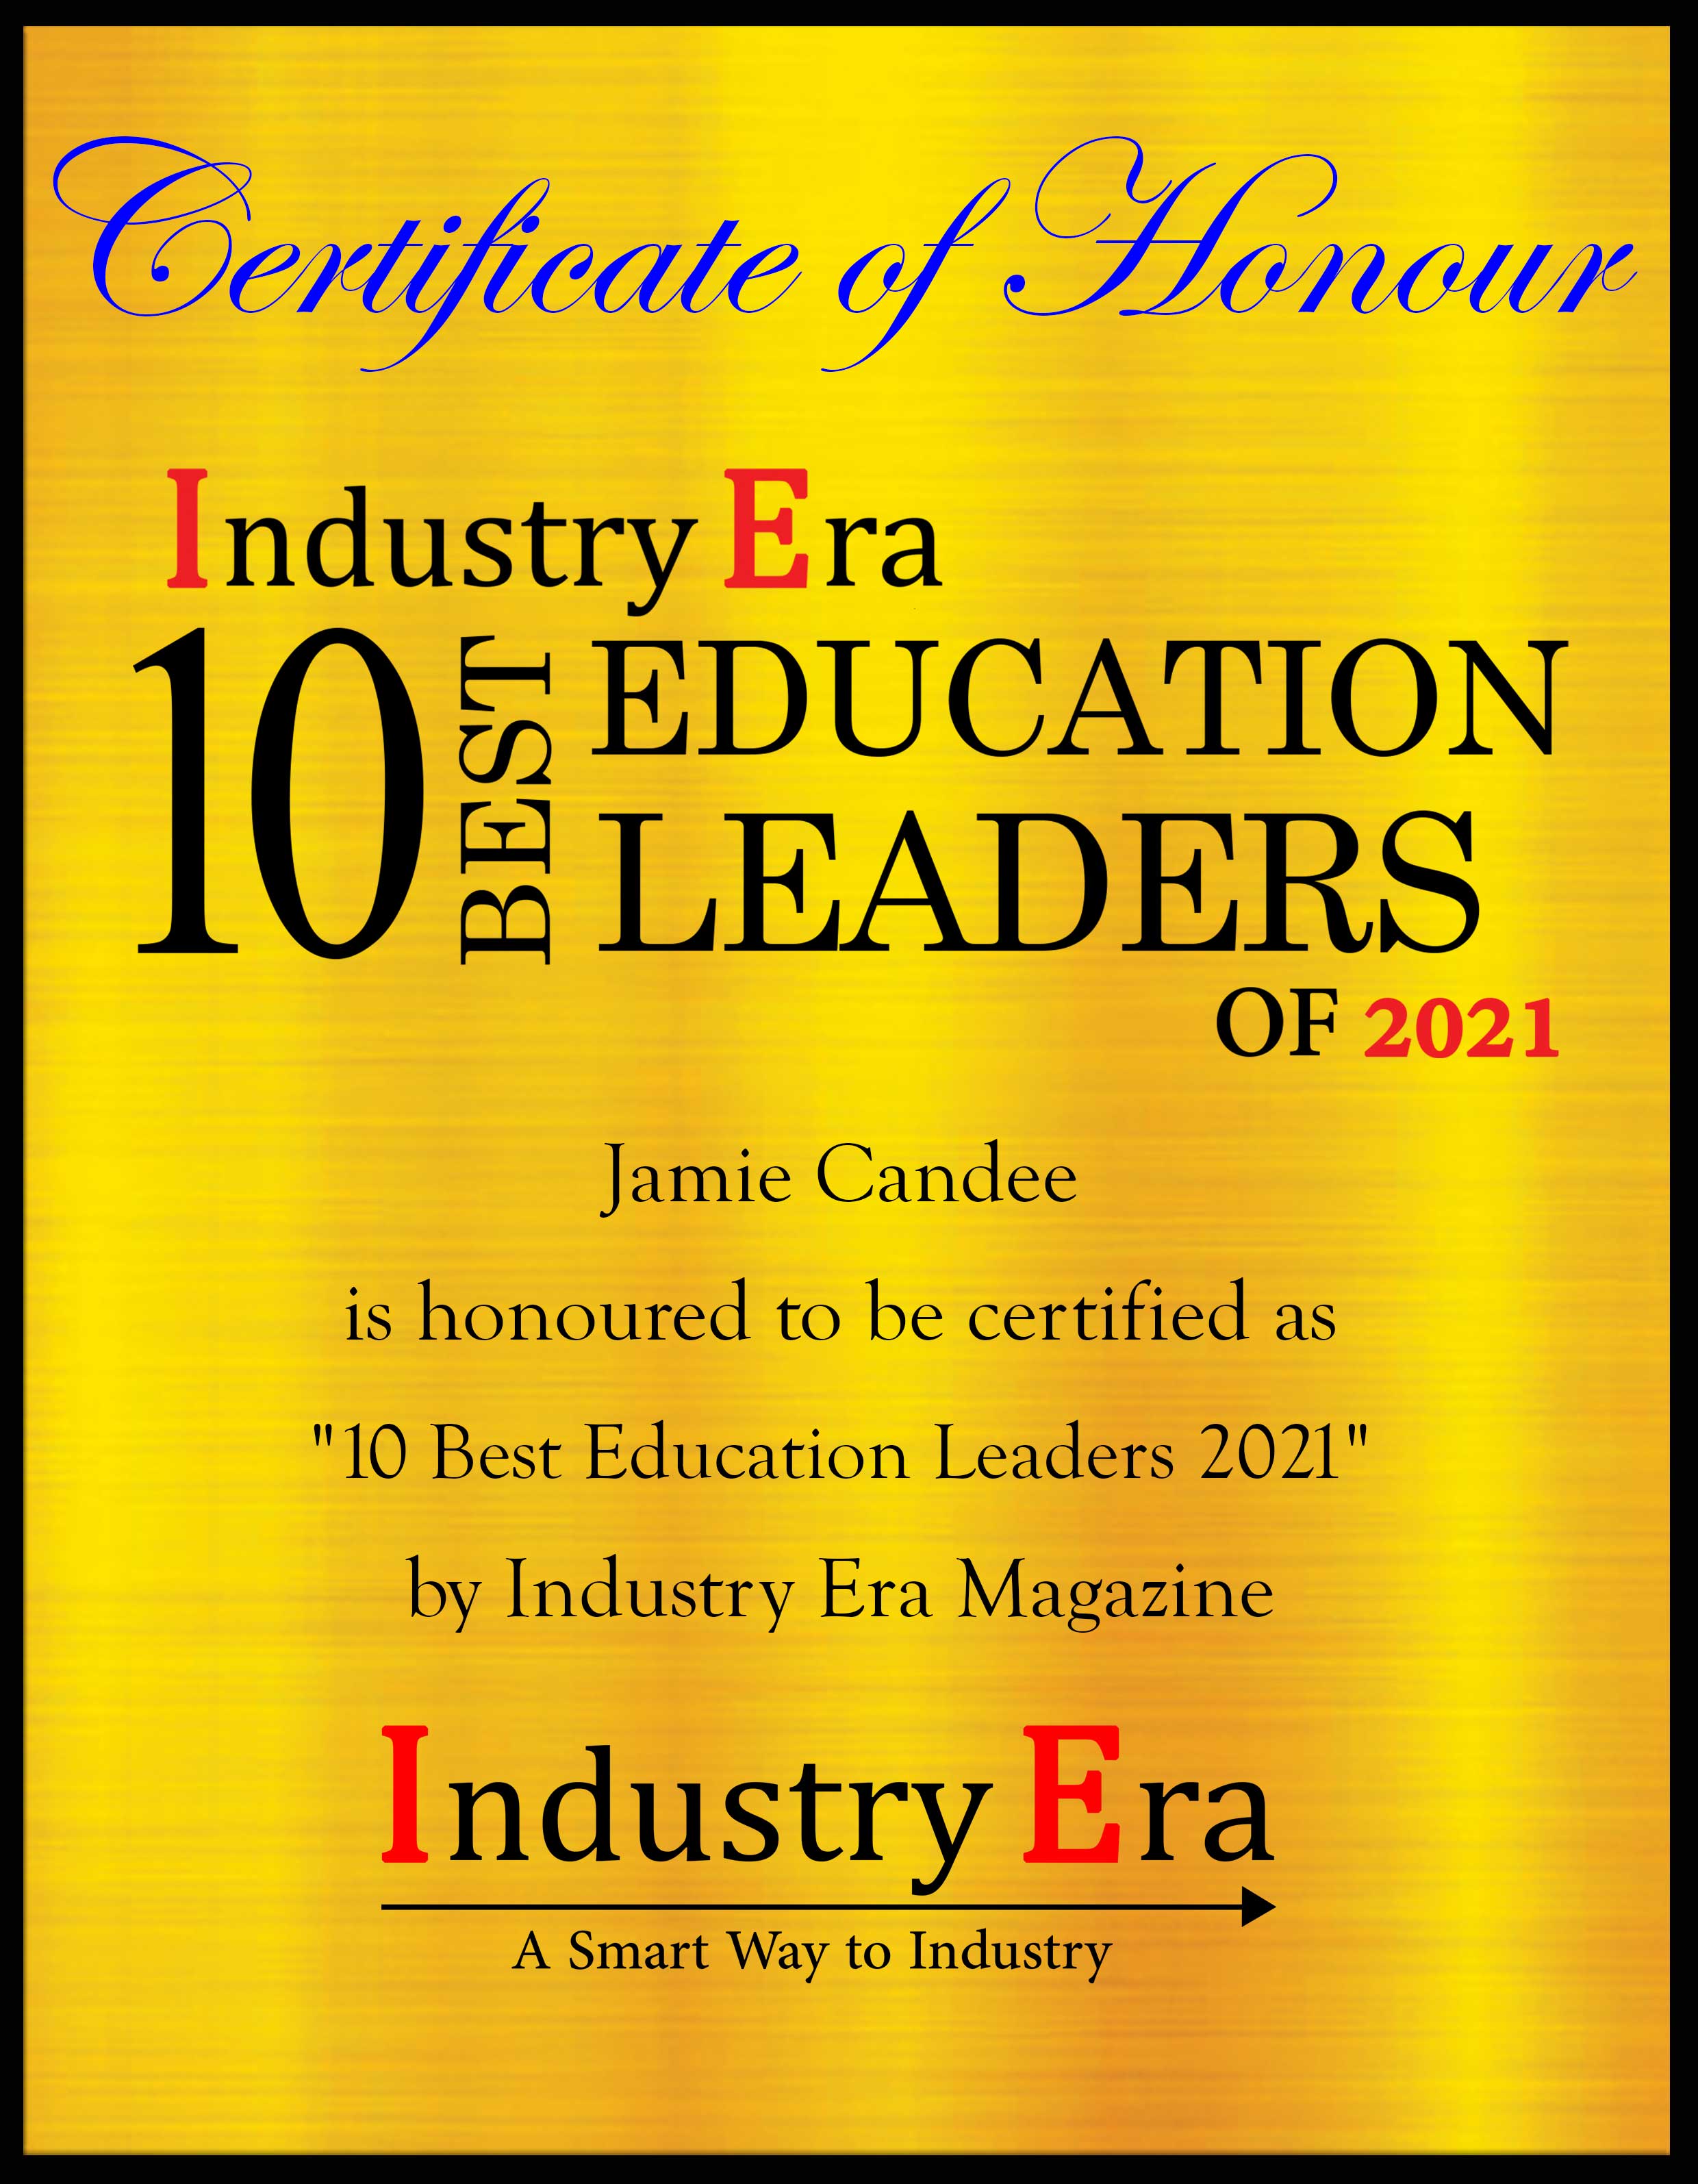 Jamie Candee, Chief Executive Officer of Edmentum Certificate